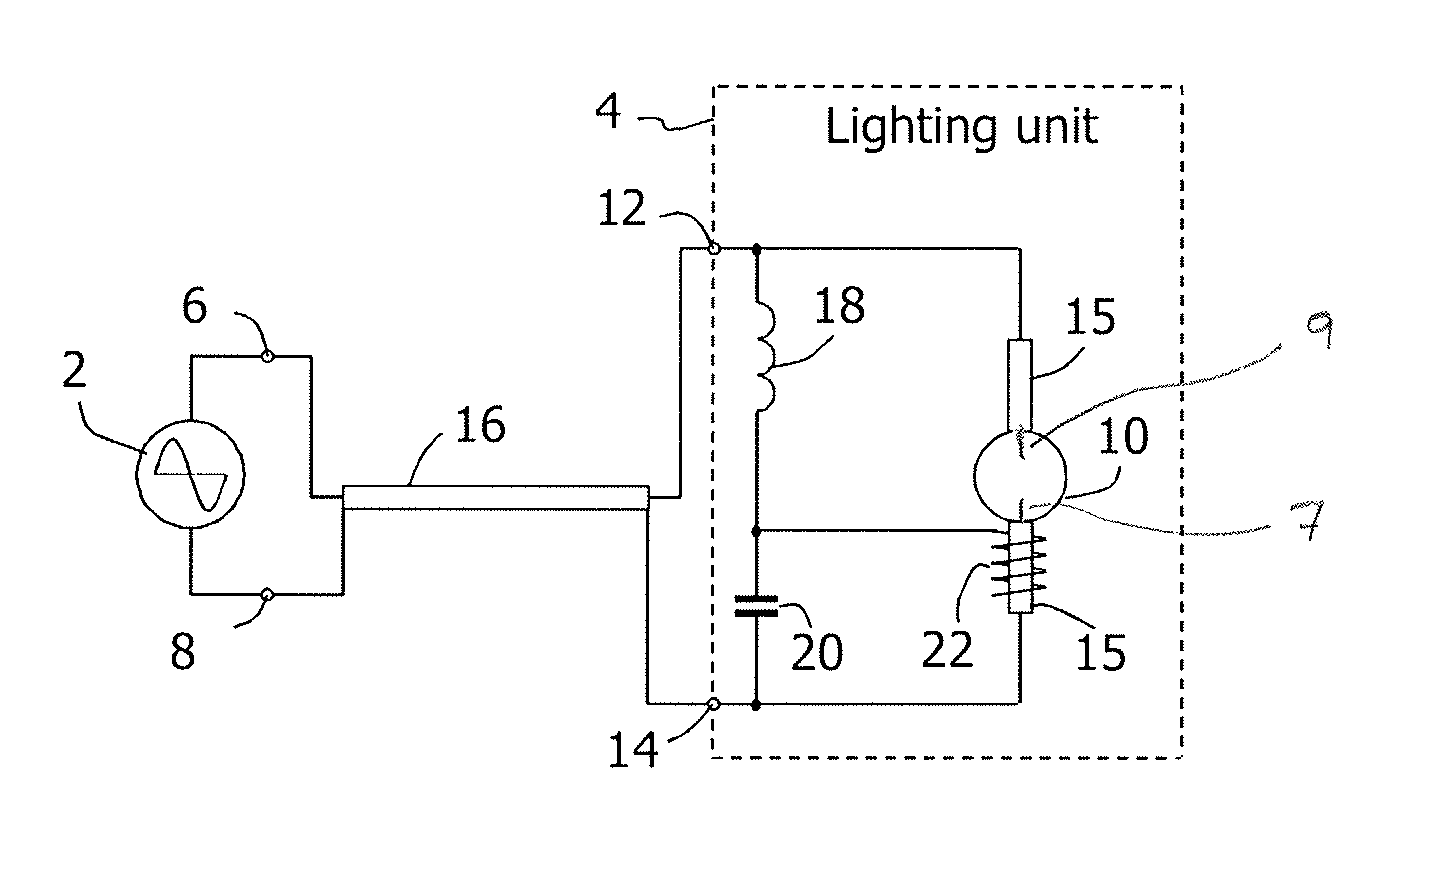 Gas discharge lamp ignition